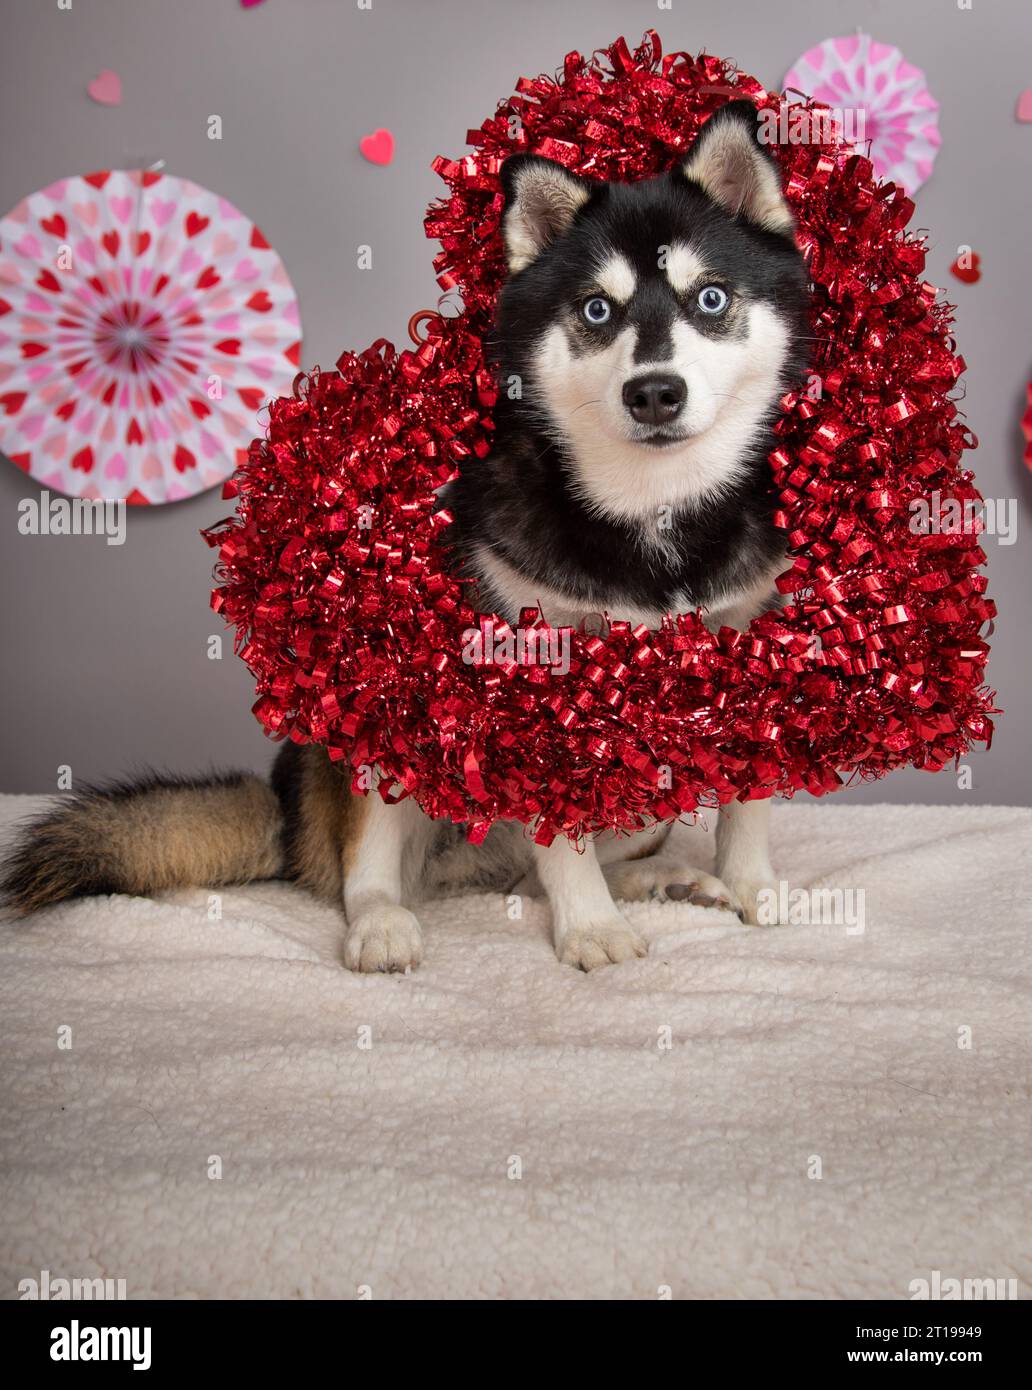 Alaskan Klee Kai Breed Dog Isolated on a Clean White Background Stock Photo  - Image of isolated, friend: 276835666